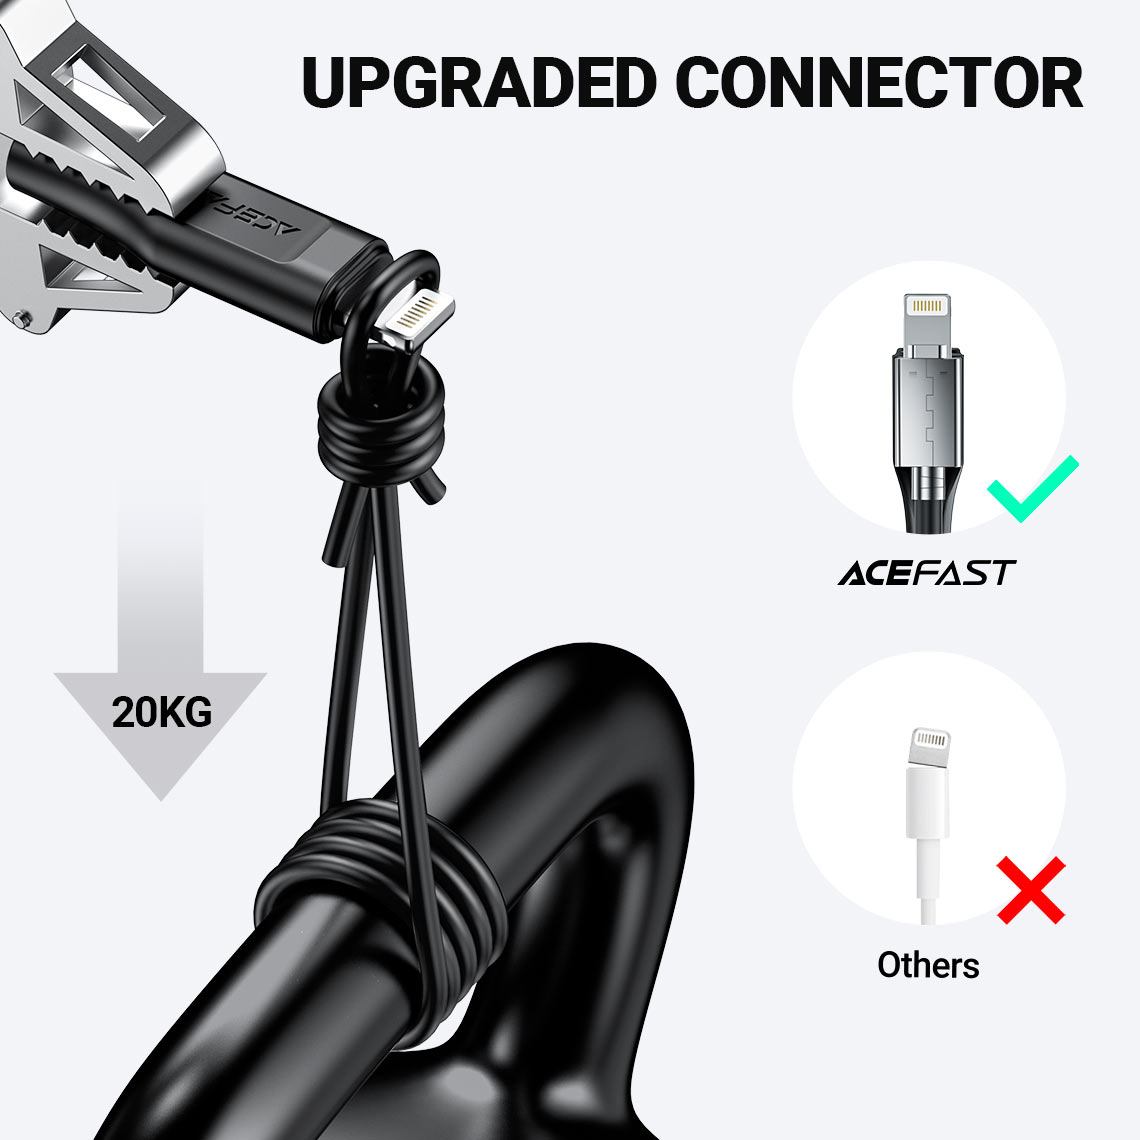 ACEFAST C3-01 USB-C To Lightning MFi Certified Fast Charging TPE Charging Data Cable ONE2WORLD 